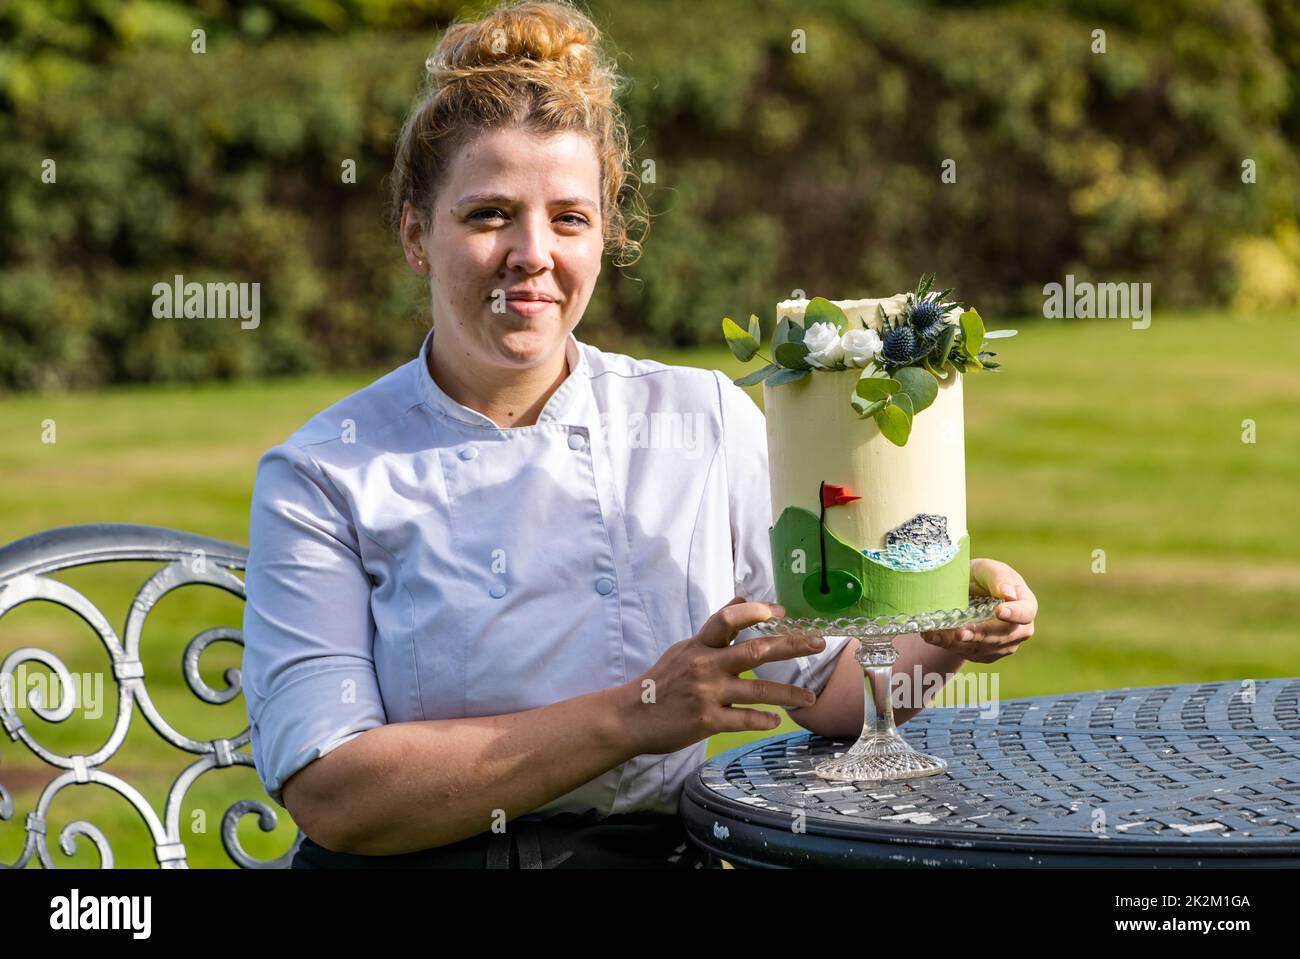 Marine Hotel, North Berwick,  Scotland, United Kingdom, 23 September 2022. Marine Hotel Birthday: Head Pastry Chef at the Lawn restaurant at the hotel has created a birthday cake to celebrate its first birthday, recognising the links to golf and the Bass Rock. Pictured: Head Pastry Chef Sarah Brion who created the cake. Credit: Sally Anderson/Alamy Live News Stock Photo